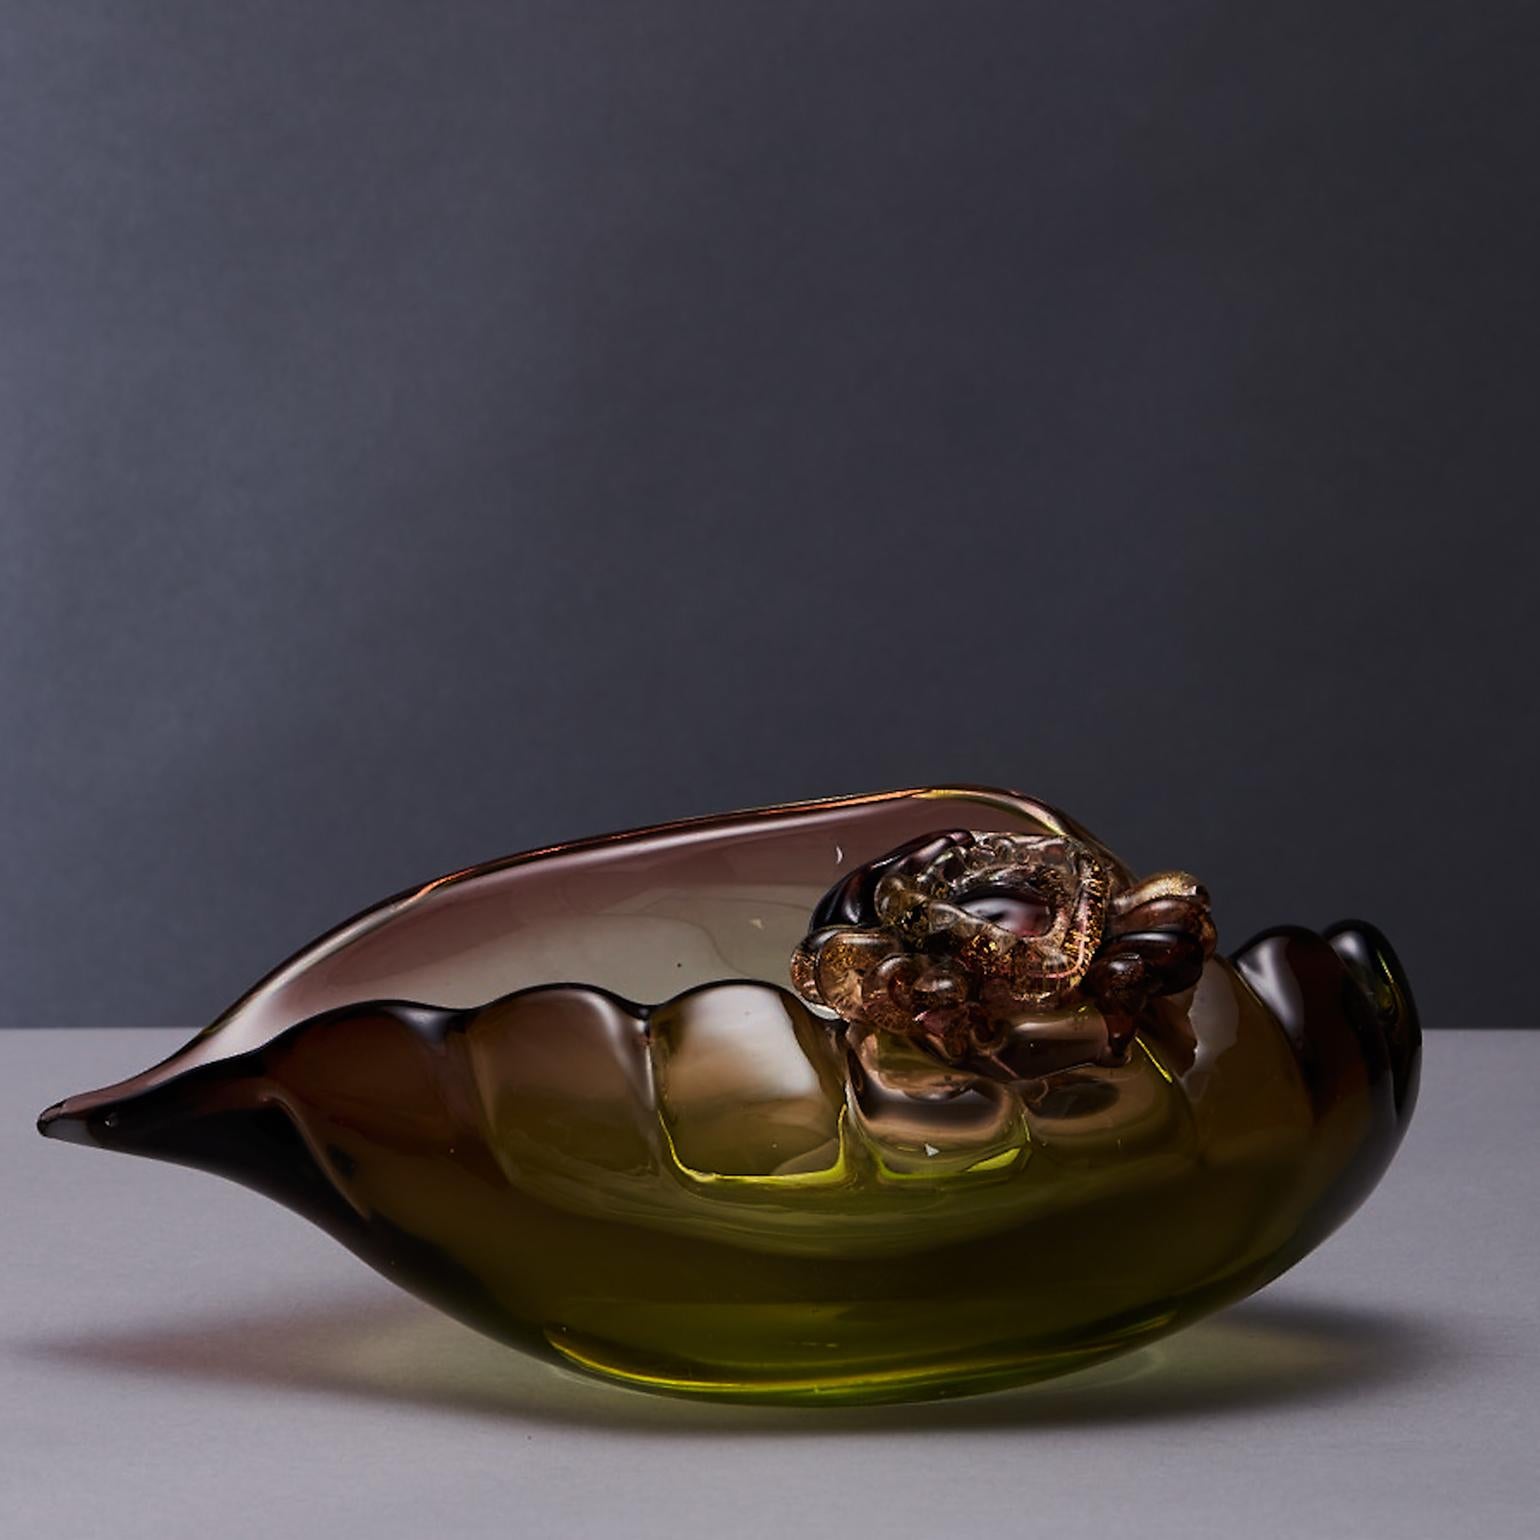 Hand blown sculptural bowl in the form of a tropical conch shell with sea crab applied in clear glass merging into tones of green, brown and deep red with gold inclusions, by to Alfredo Barbini (1912-2007) circa 1960.The Venetian artist grew up in